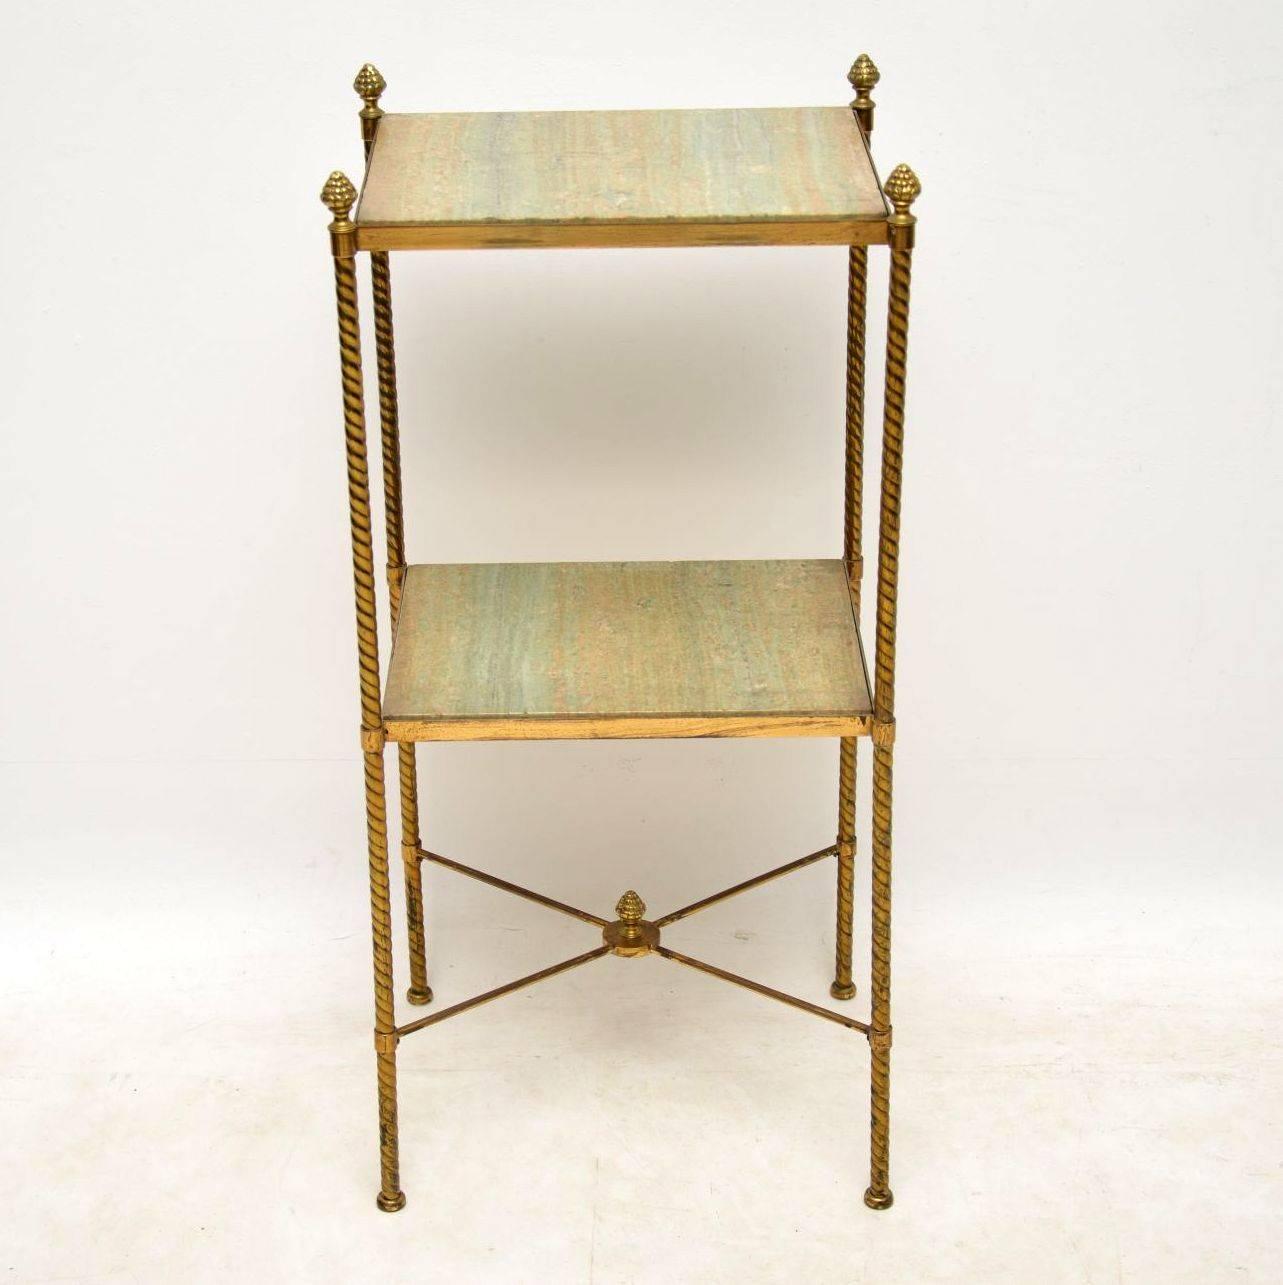 Antique French brass and marble two-tier table or stand. This is quite an unusual elegant piece of furniture and has lots of character. The four brass uprights have a king of spiral or barley twist design. There are brass finials on the tops and in